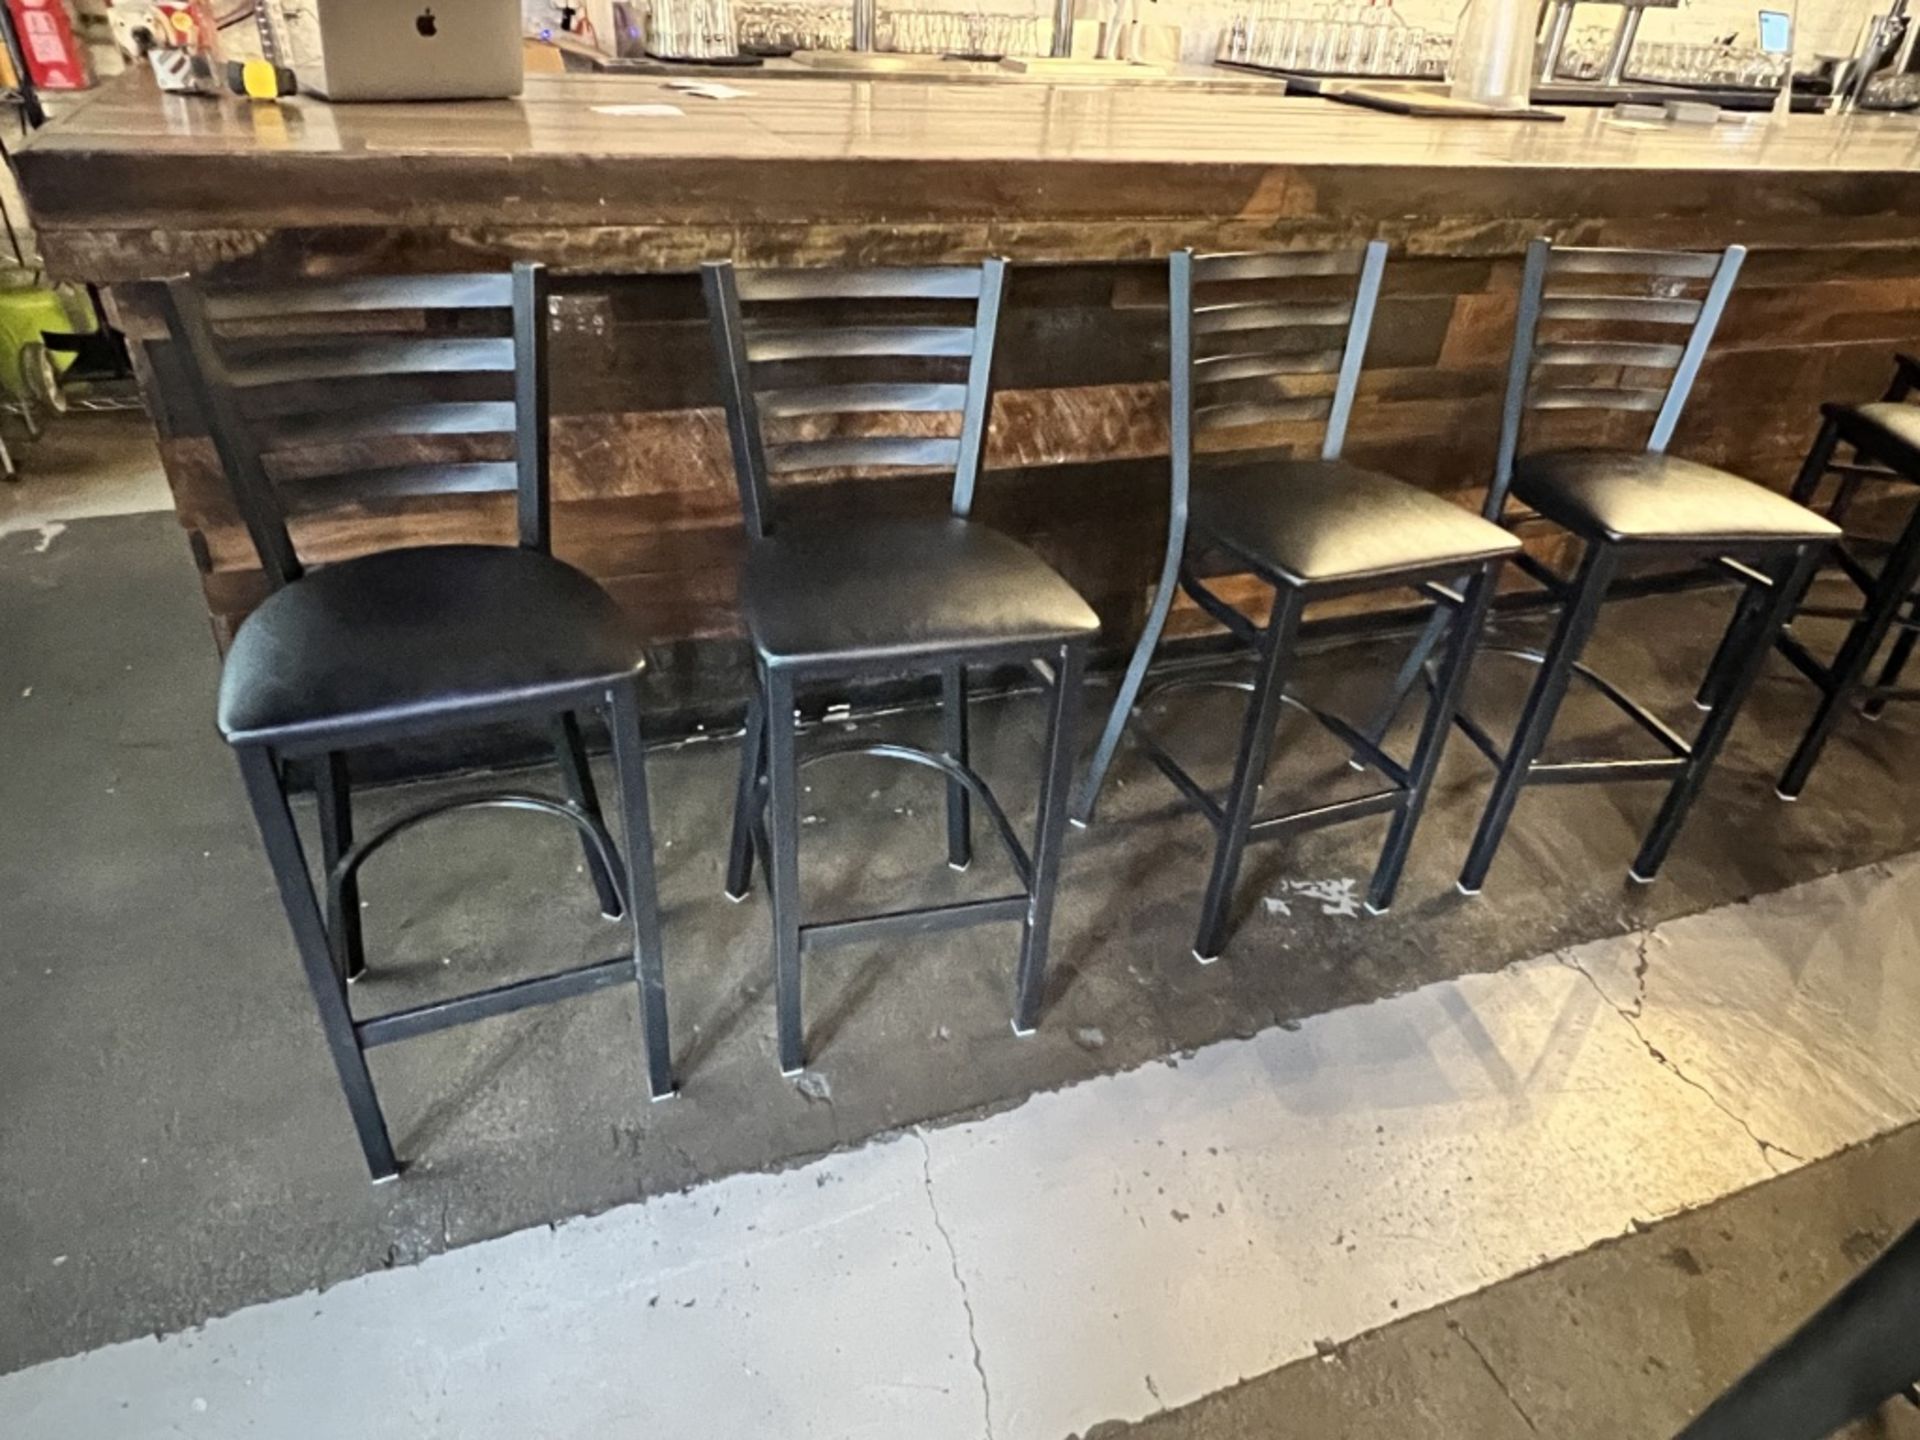 LOT OF: (4) HI-TOP PADDED CHAIRS W/ METAL FRAME